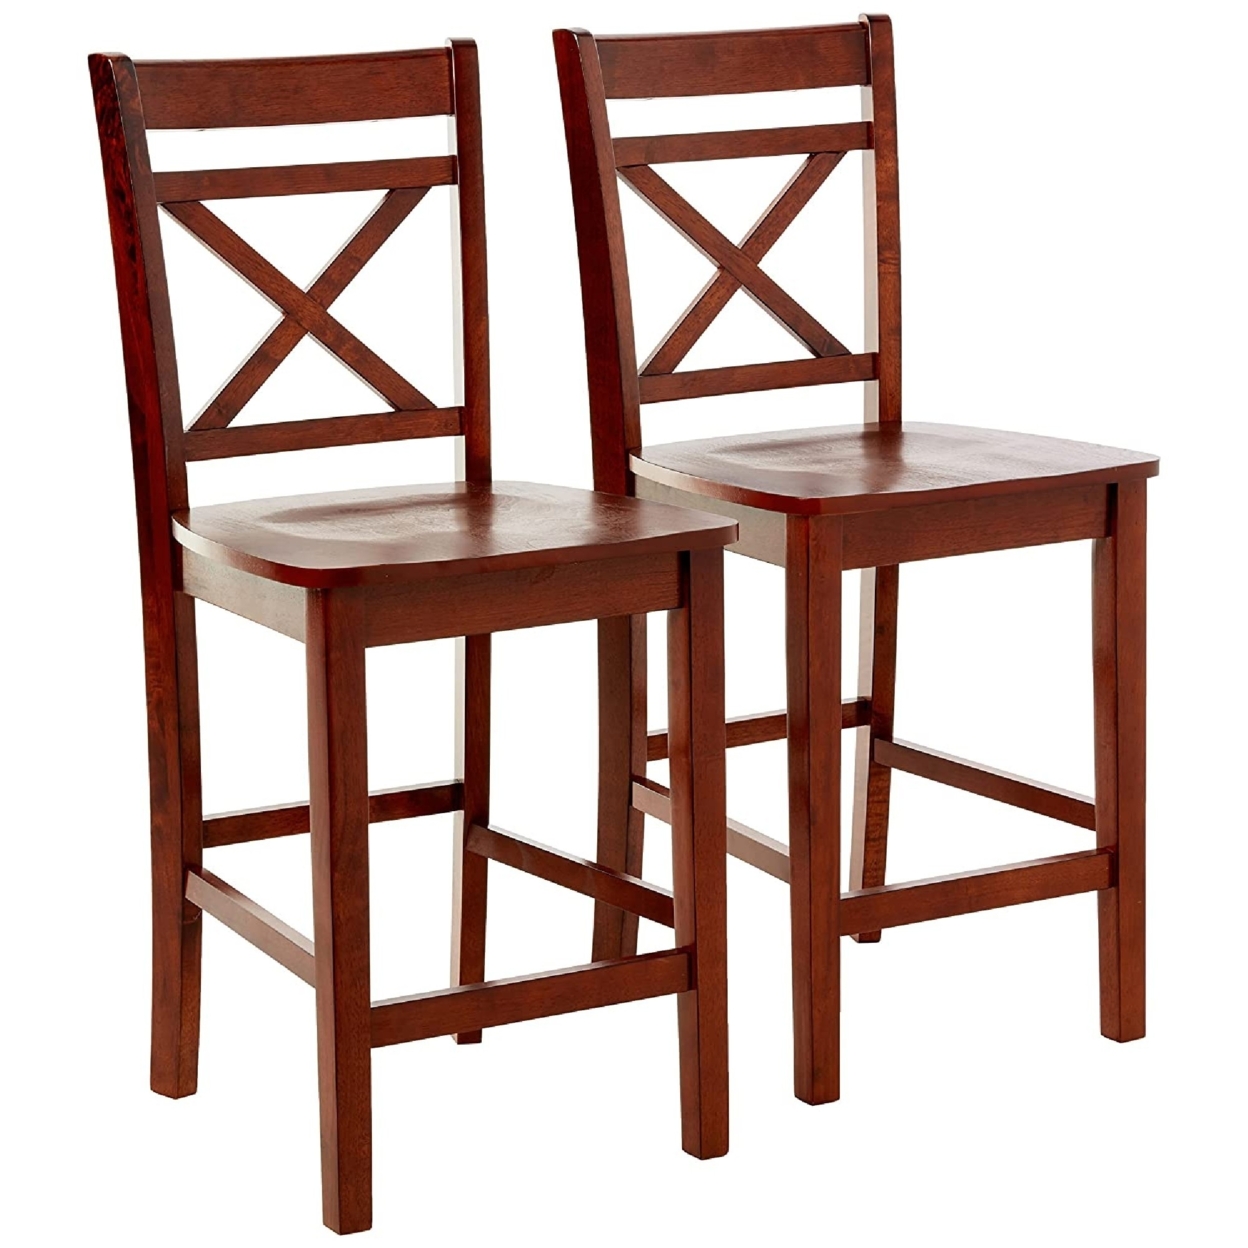 Wooden Counter Height Chair With Cross Back, Set Of 2, Cherry Brown- Saltoro Sherpi